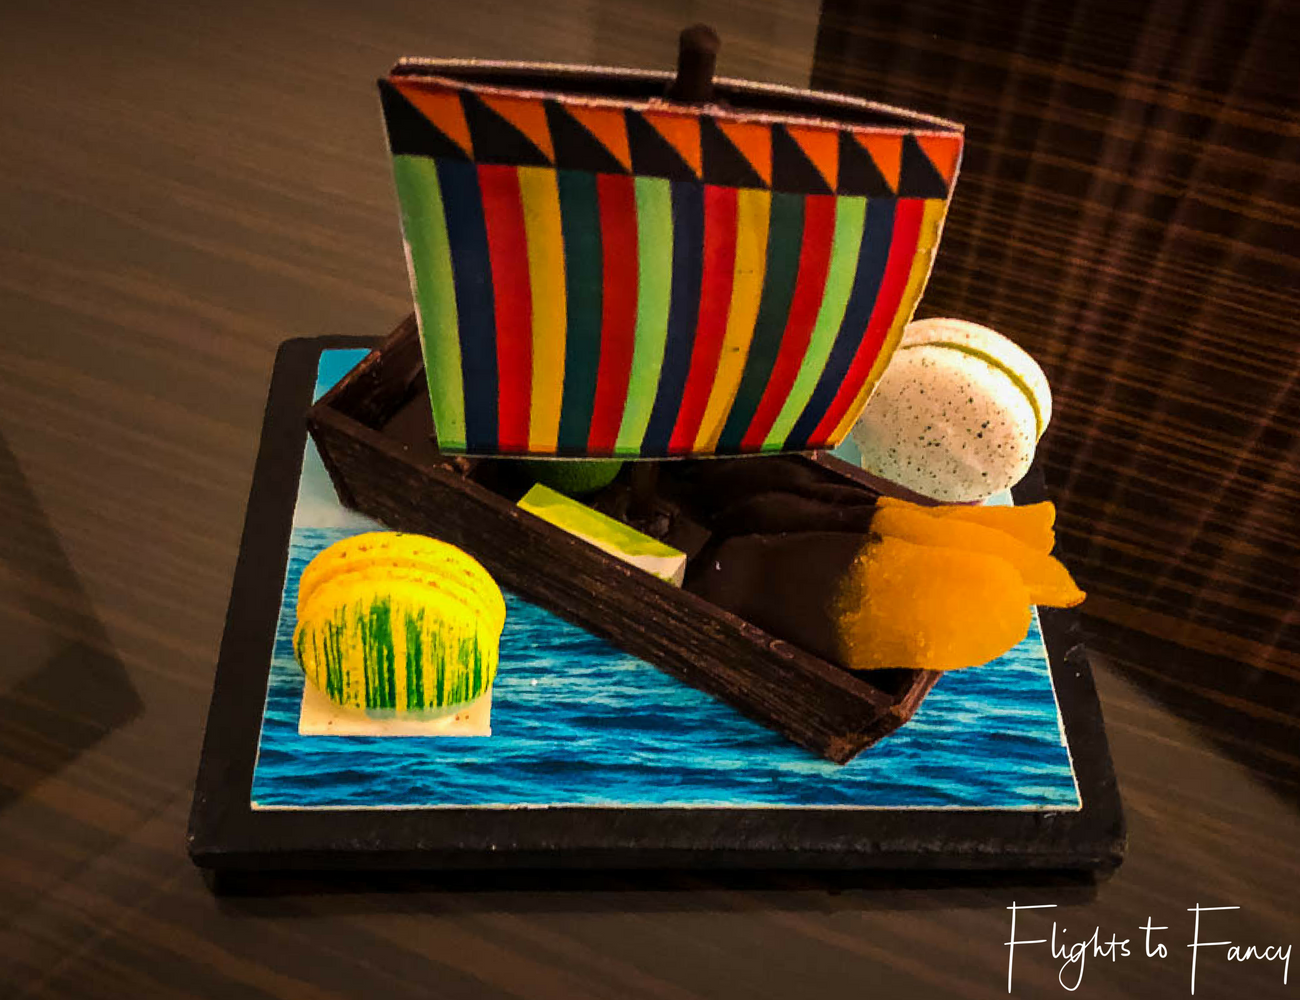 Flights to Fancy - Fairmont Makati Welcome Chocolate